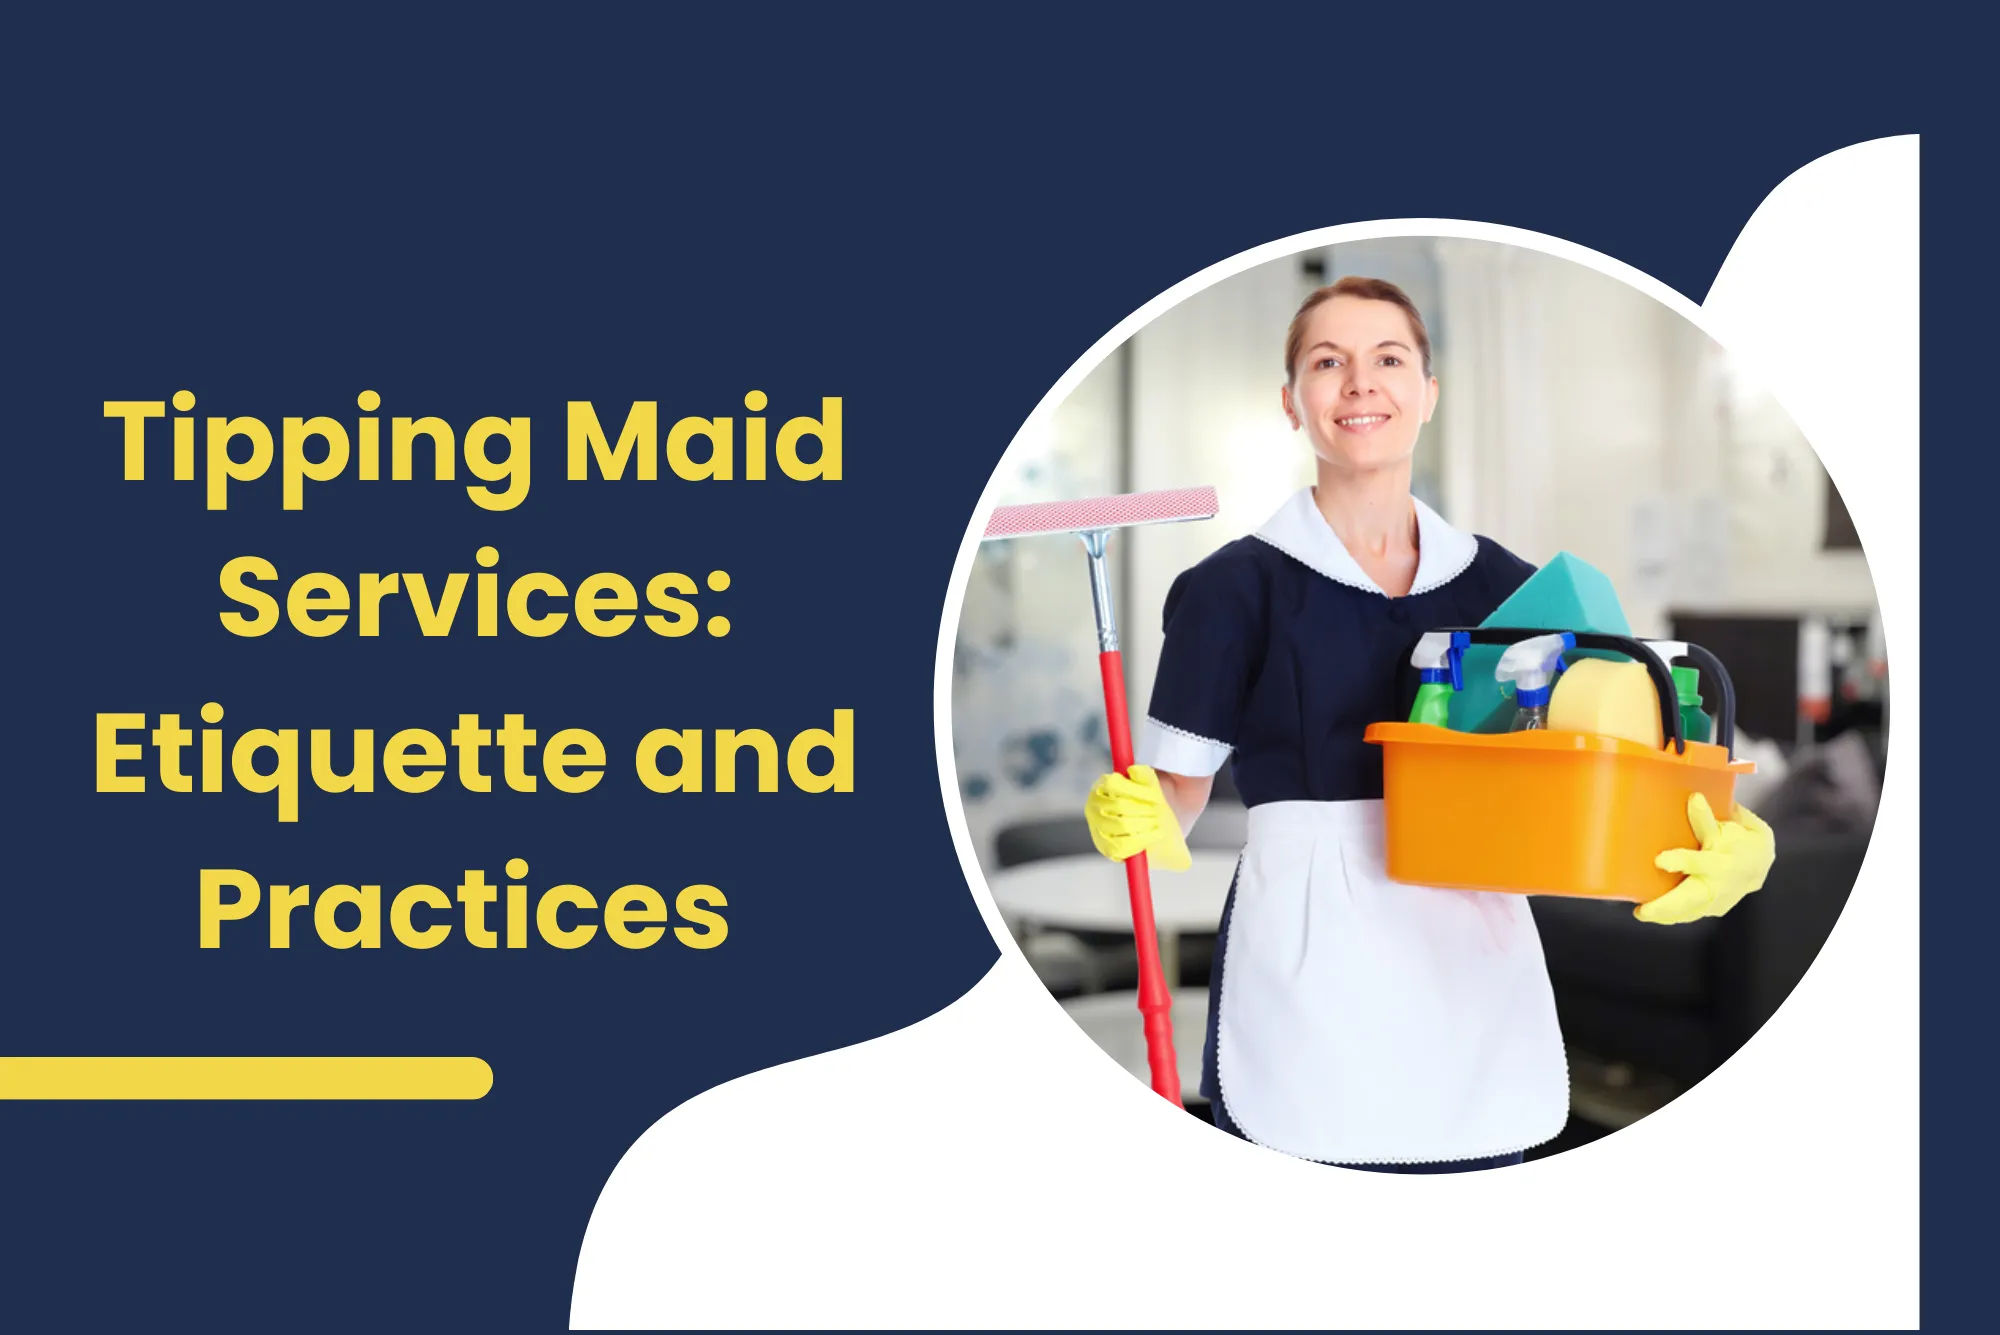 Tipping Maid Services Etiquette and Practices